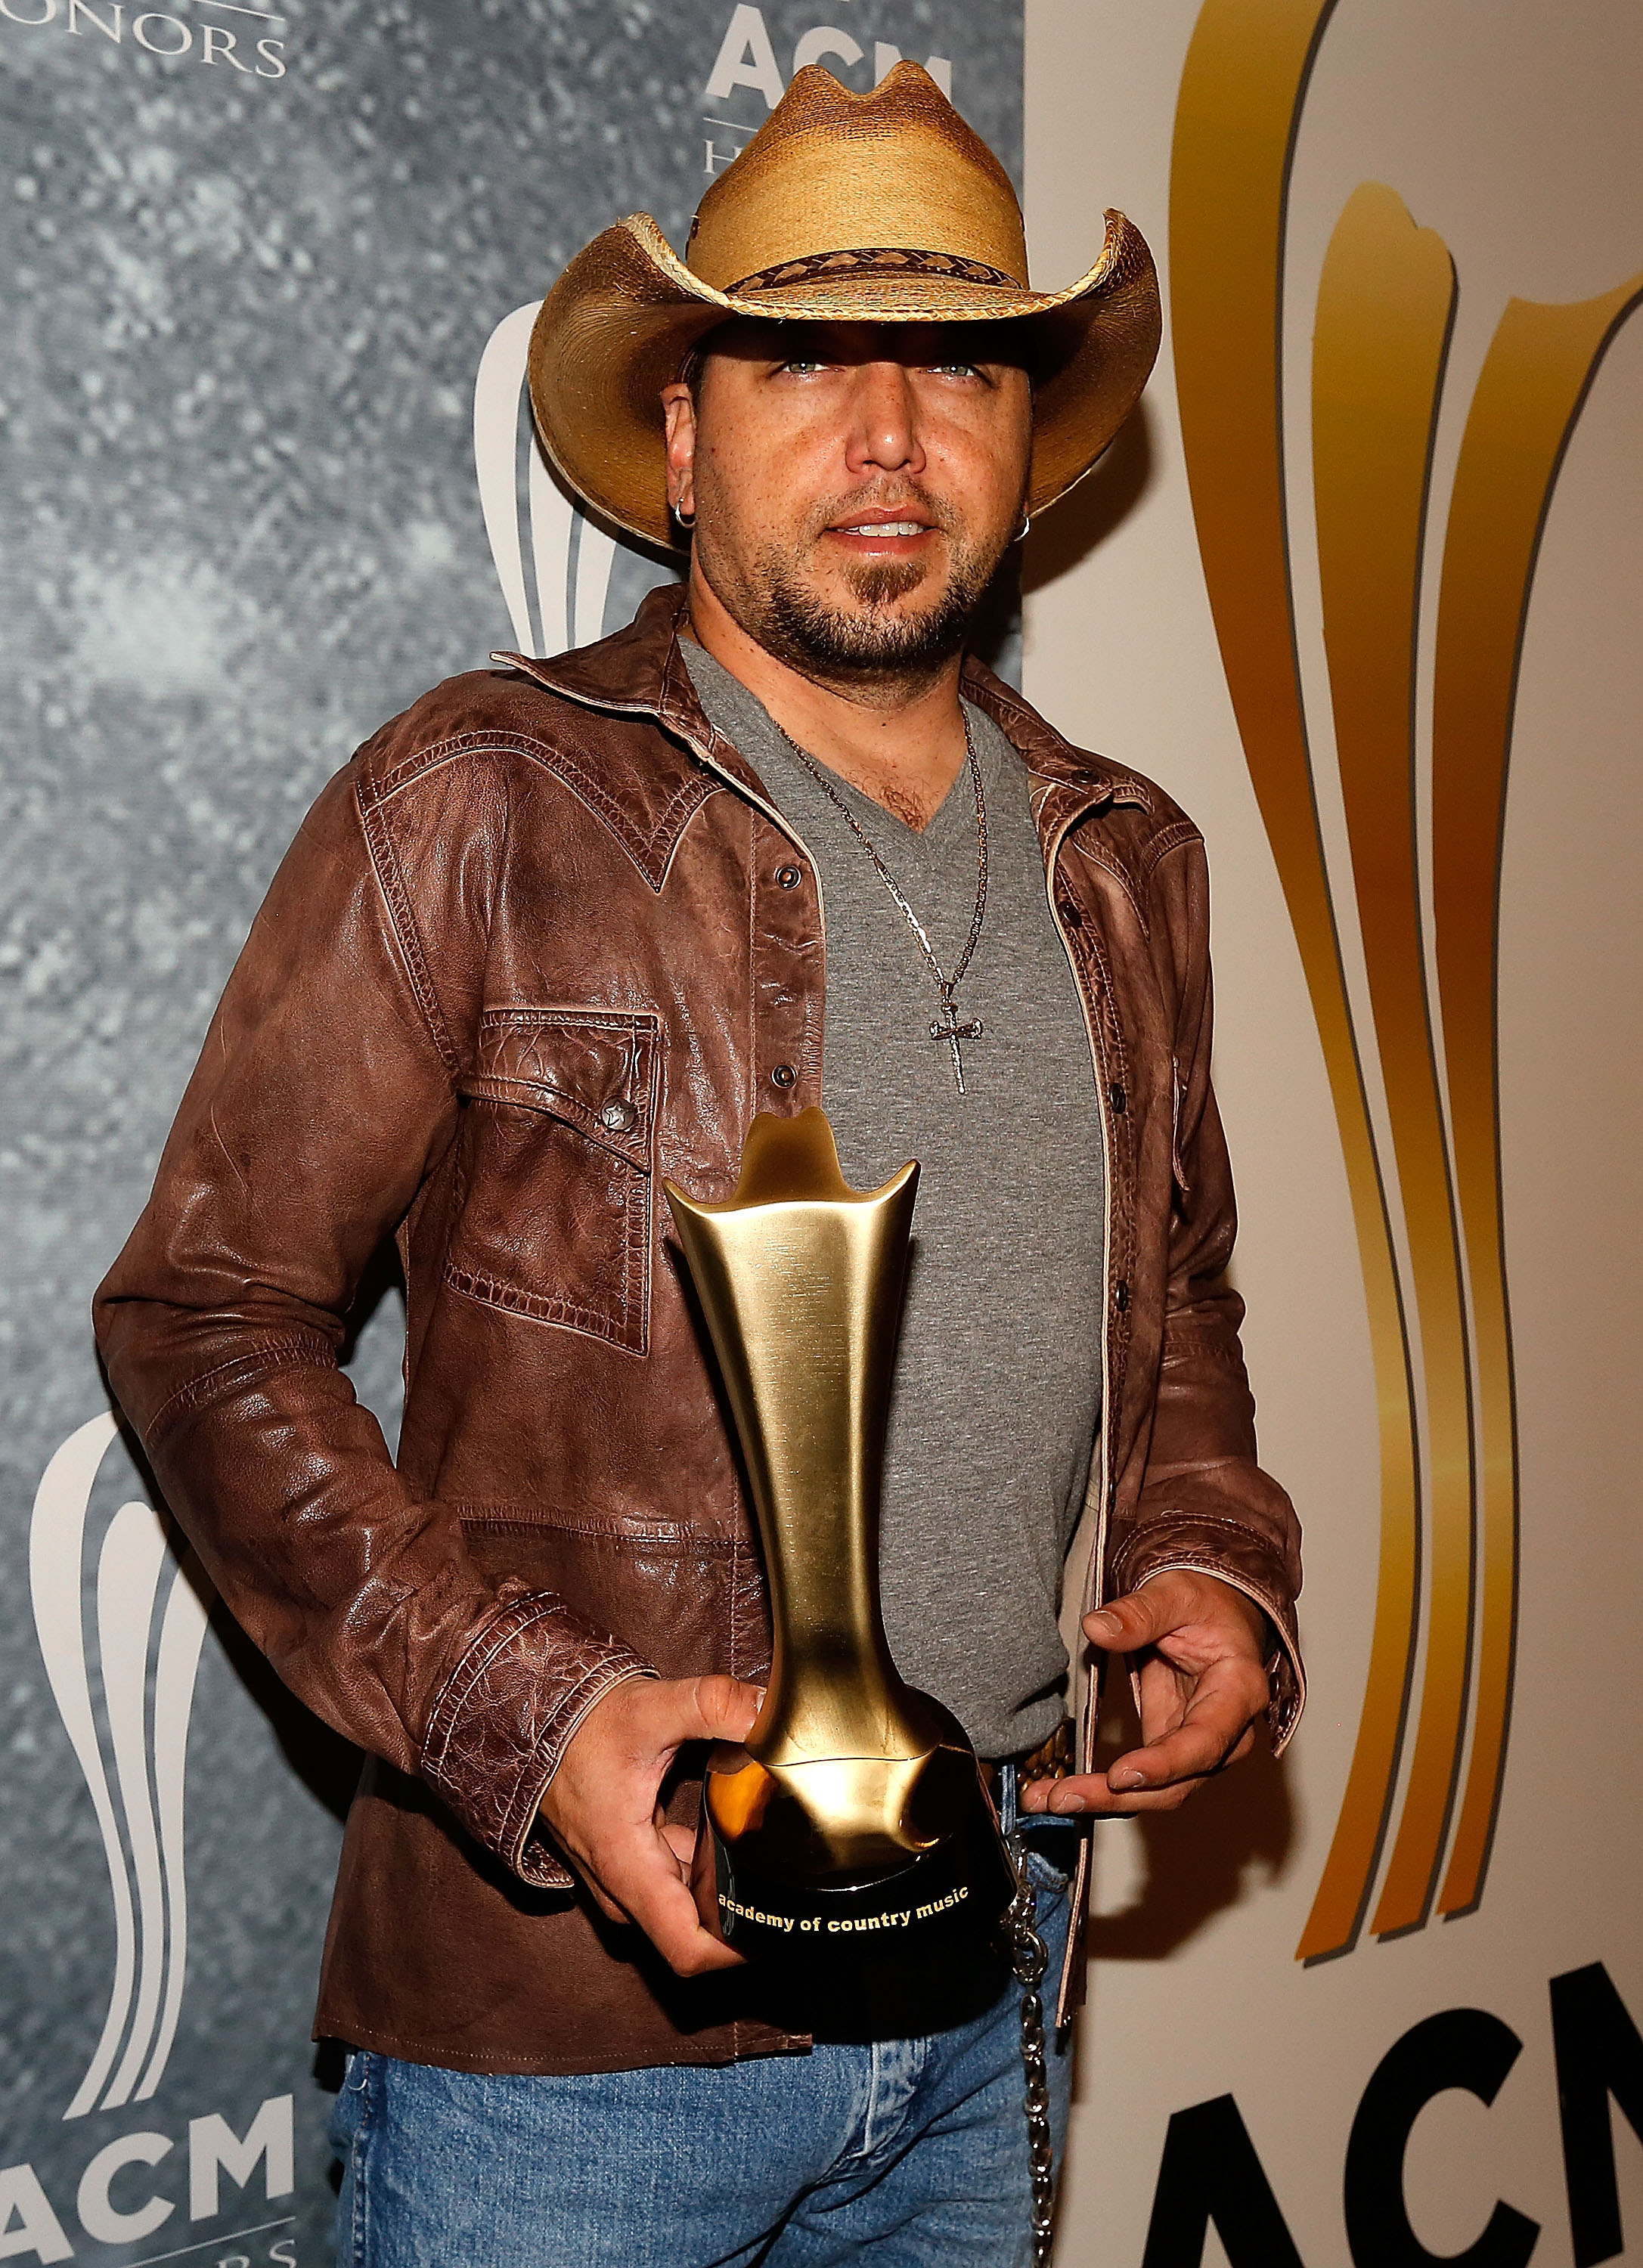 Related Pictures Jason Aldean Image